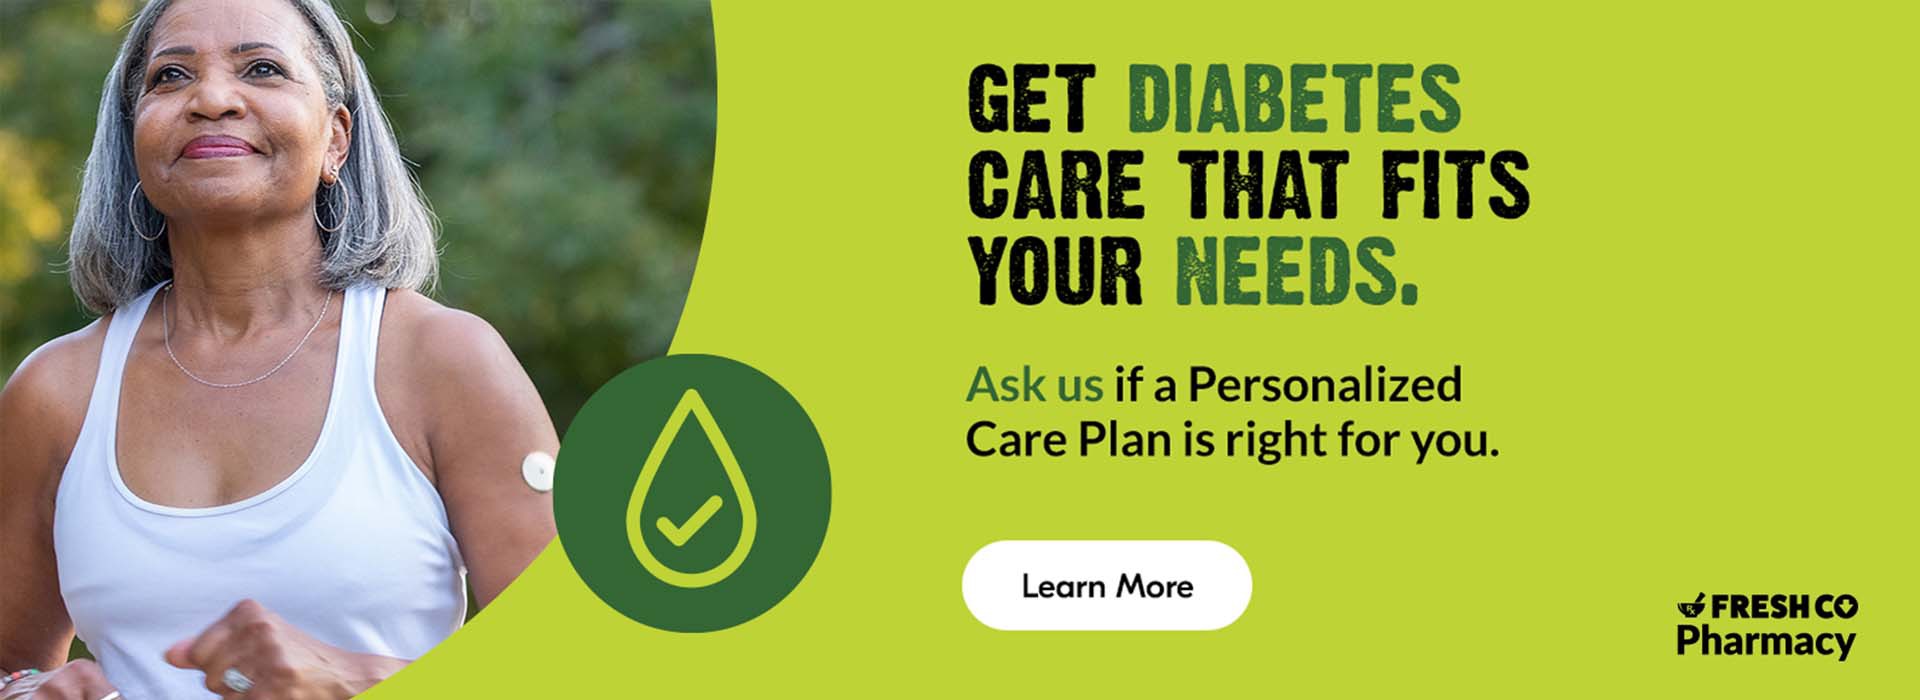 Text Reading 'Get diabetes care that fits your needs at FreshCo Pharmacy. Ask us if a Personalized Care Plan is right for you. 'Learn More' by clicking on the button below.'